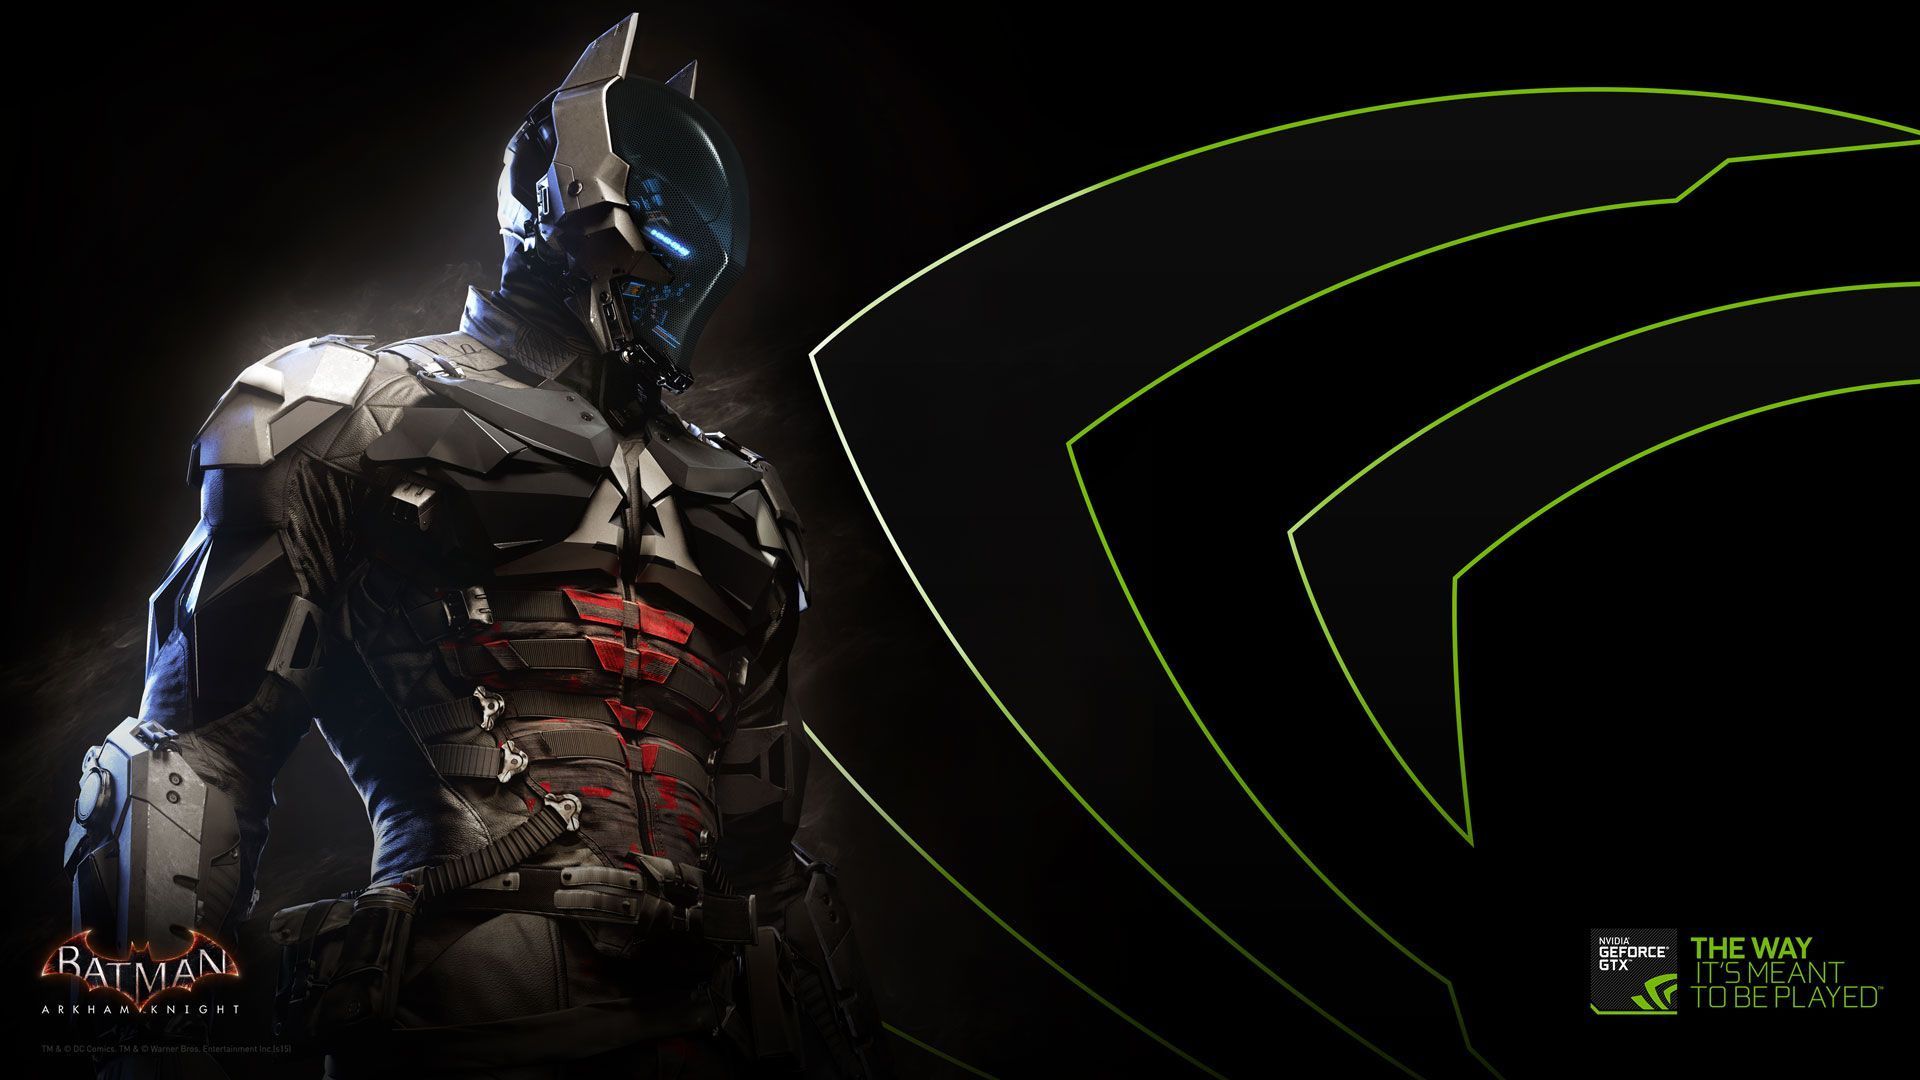 Download these Batman: Arkham Knight Wallpapers | GeForce